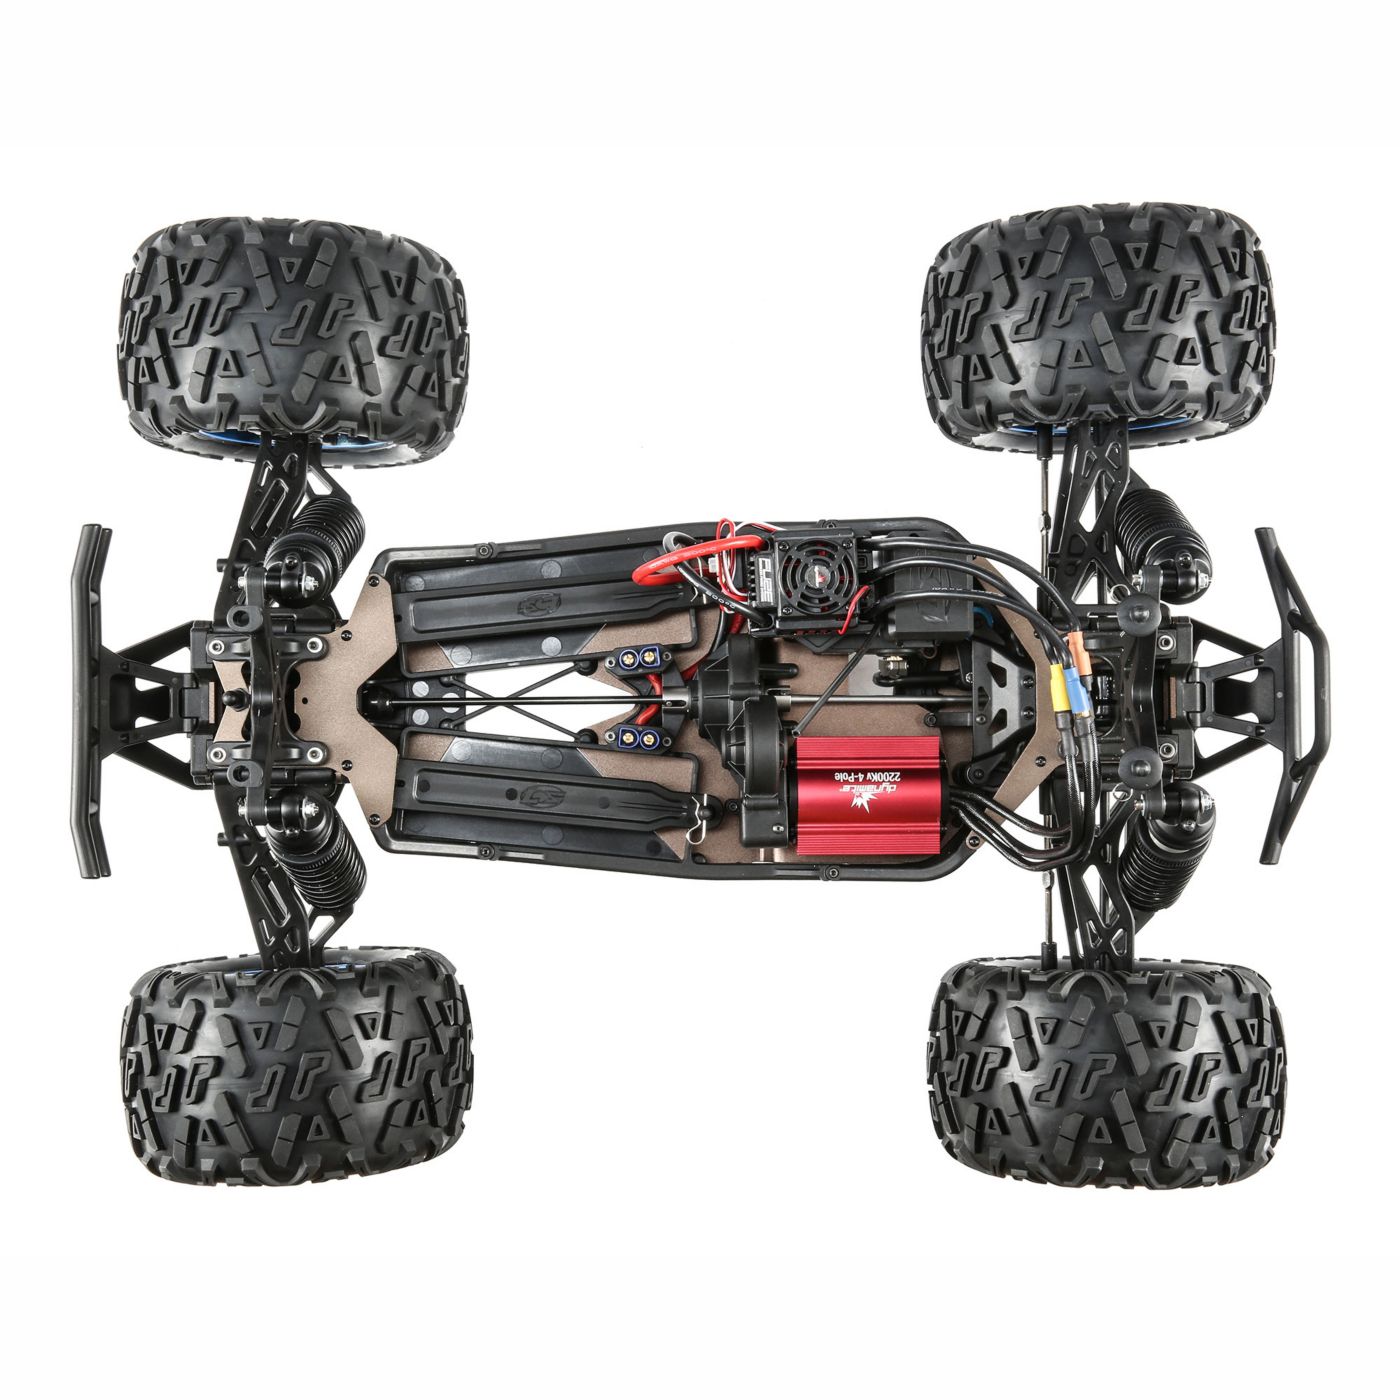 Losi LST 3XL-E RC Monster Truck - Chassis